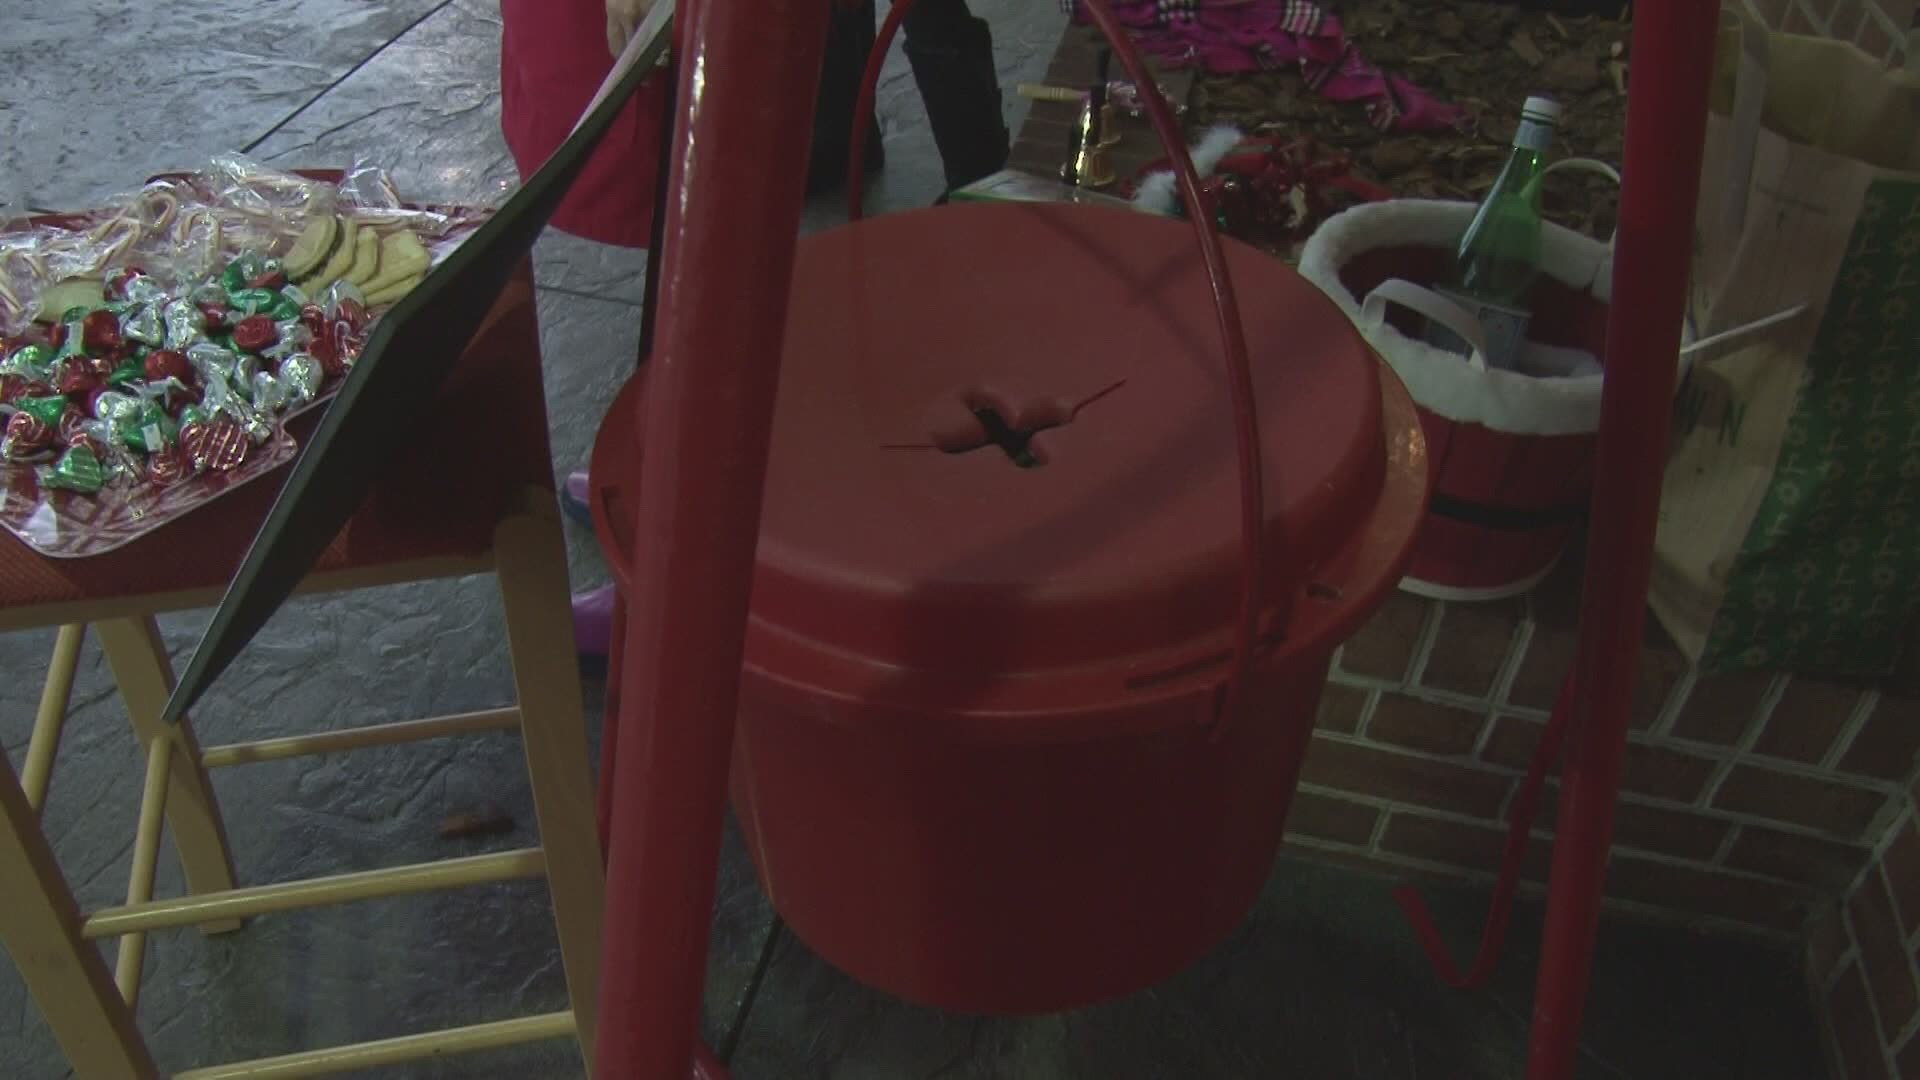 The Salvation Army is kicking off its Red Kettle campaign earlier than ever.